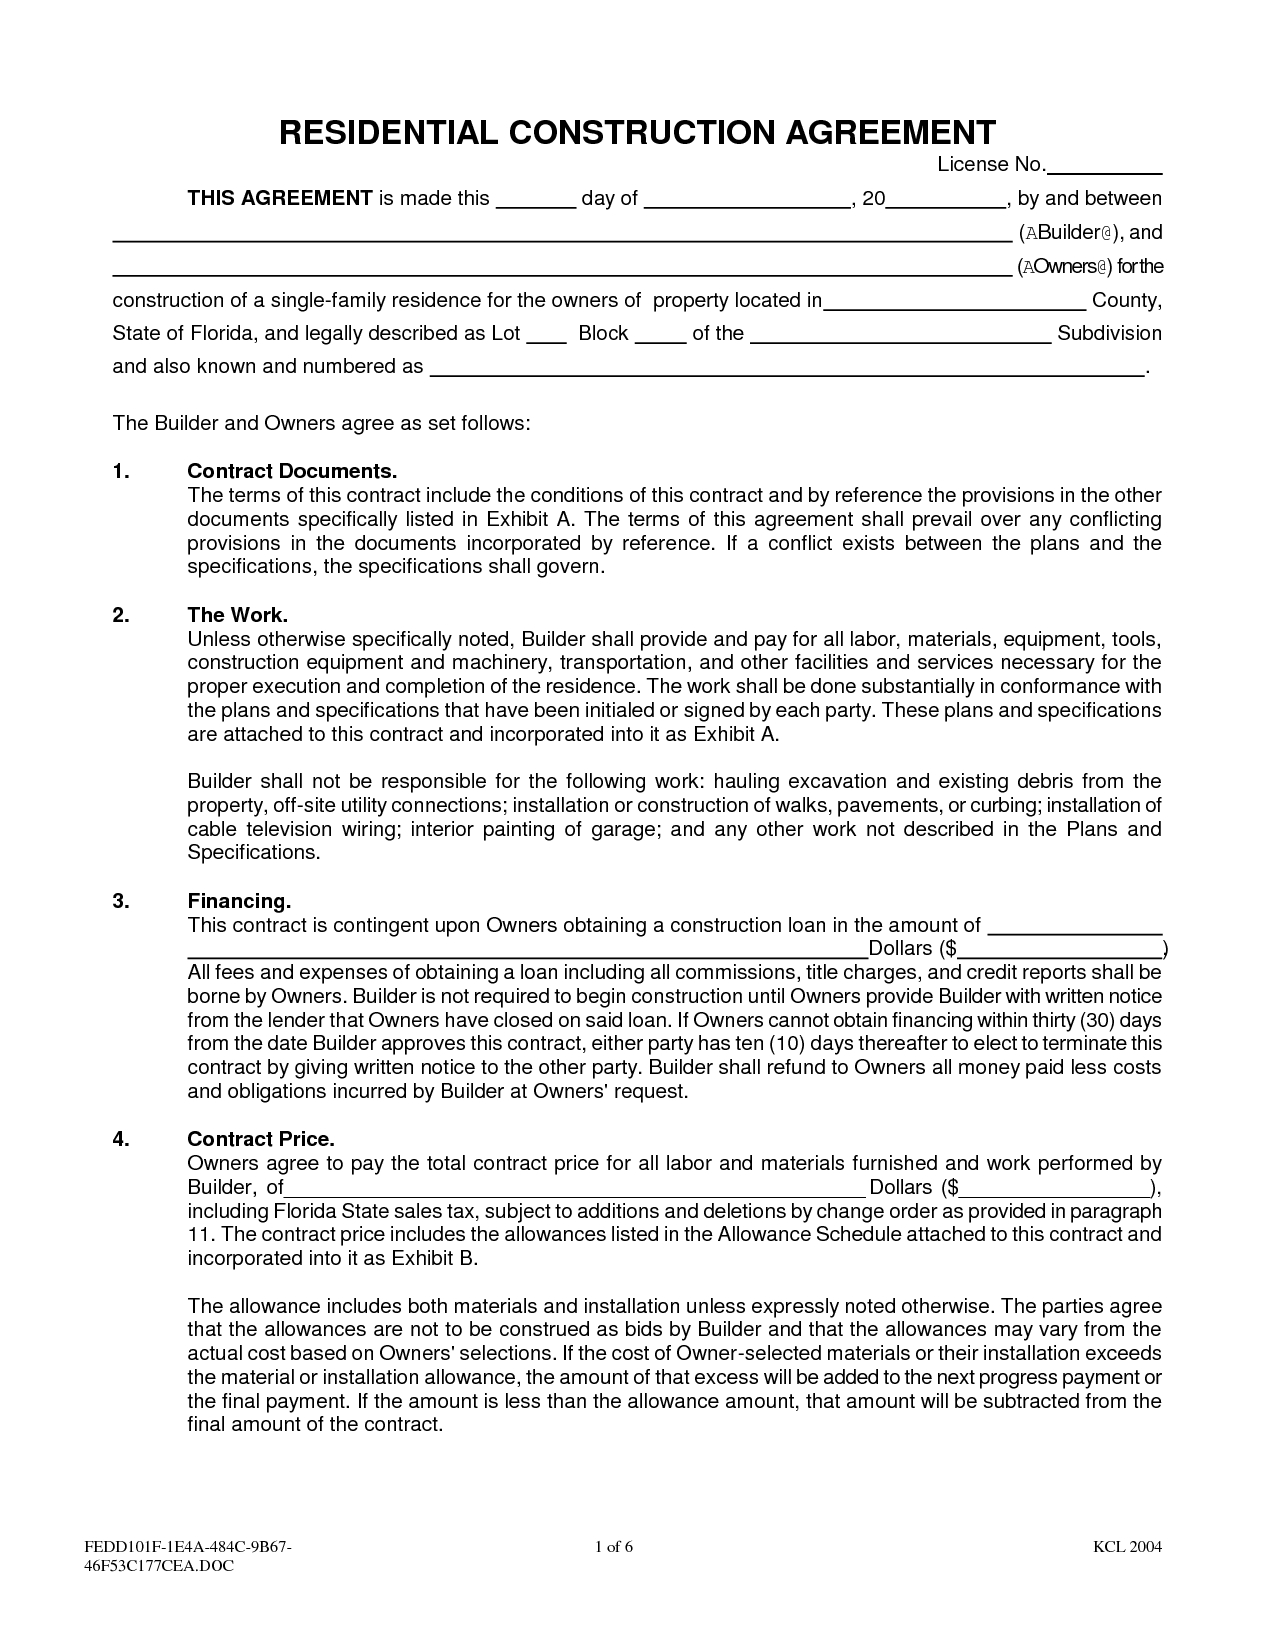 Interior Design Contract Agreement - Free Printable Documents for Fresh Interior Decorator Contract Template